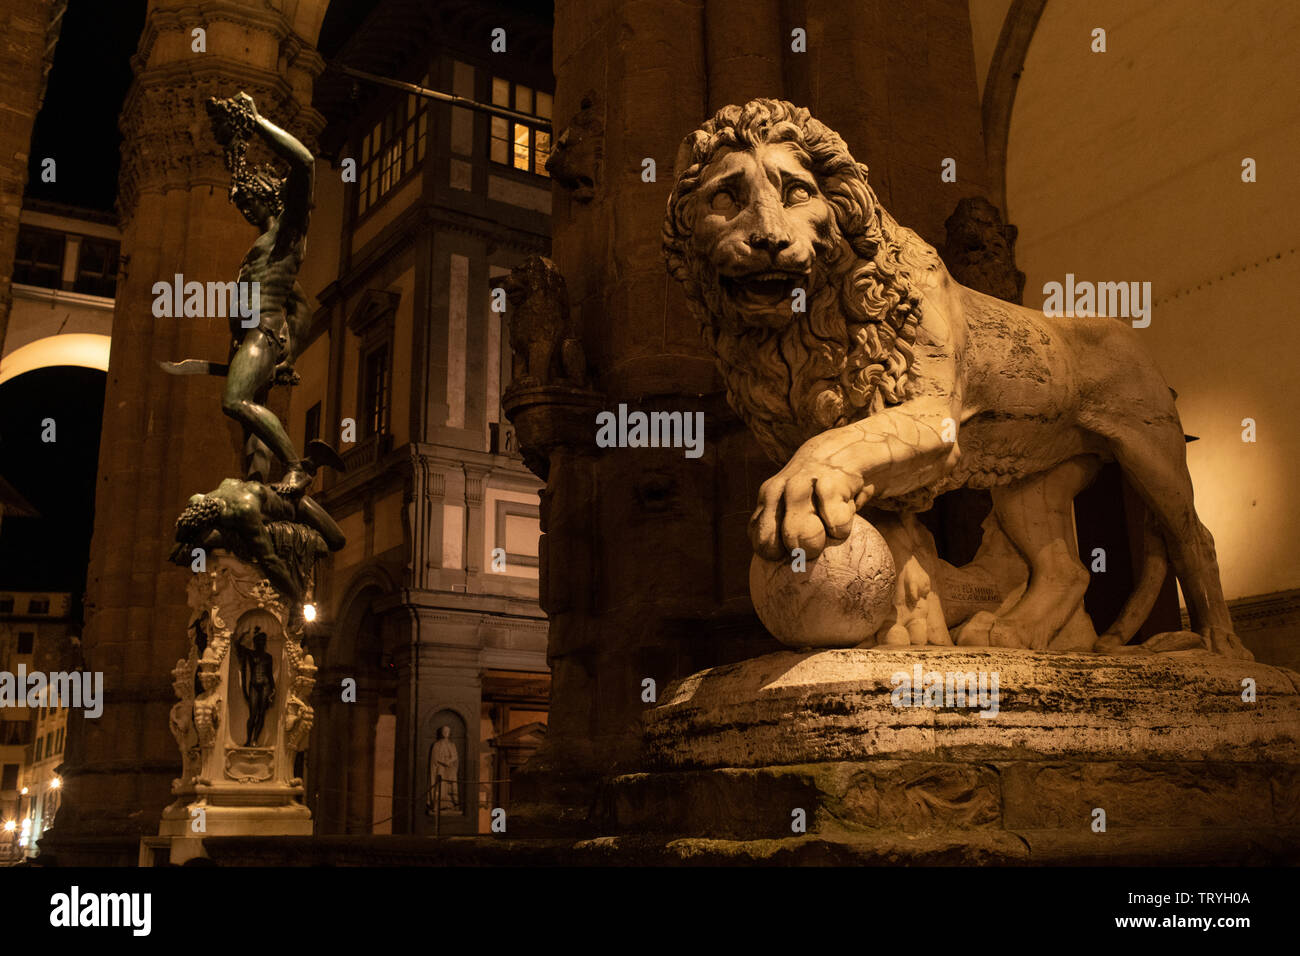 One of the Medici lions at the Loggia dei Lanzi in the Piazza della Signoria in Florence, Italy. To the left is a statue of Perseus. Stock Photo